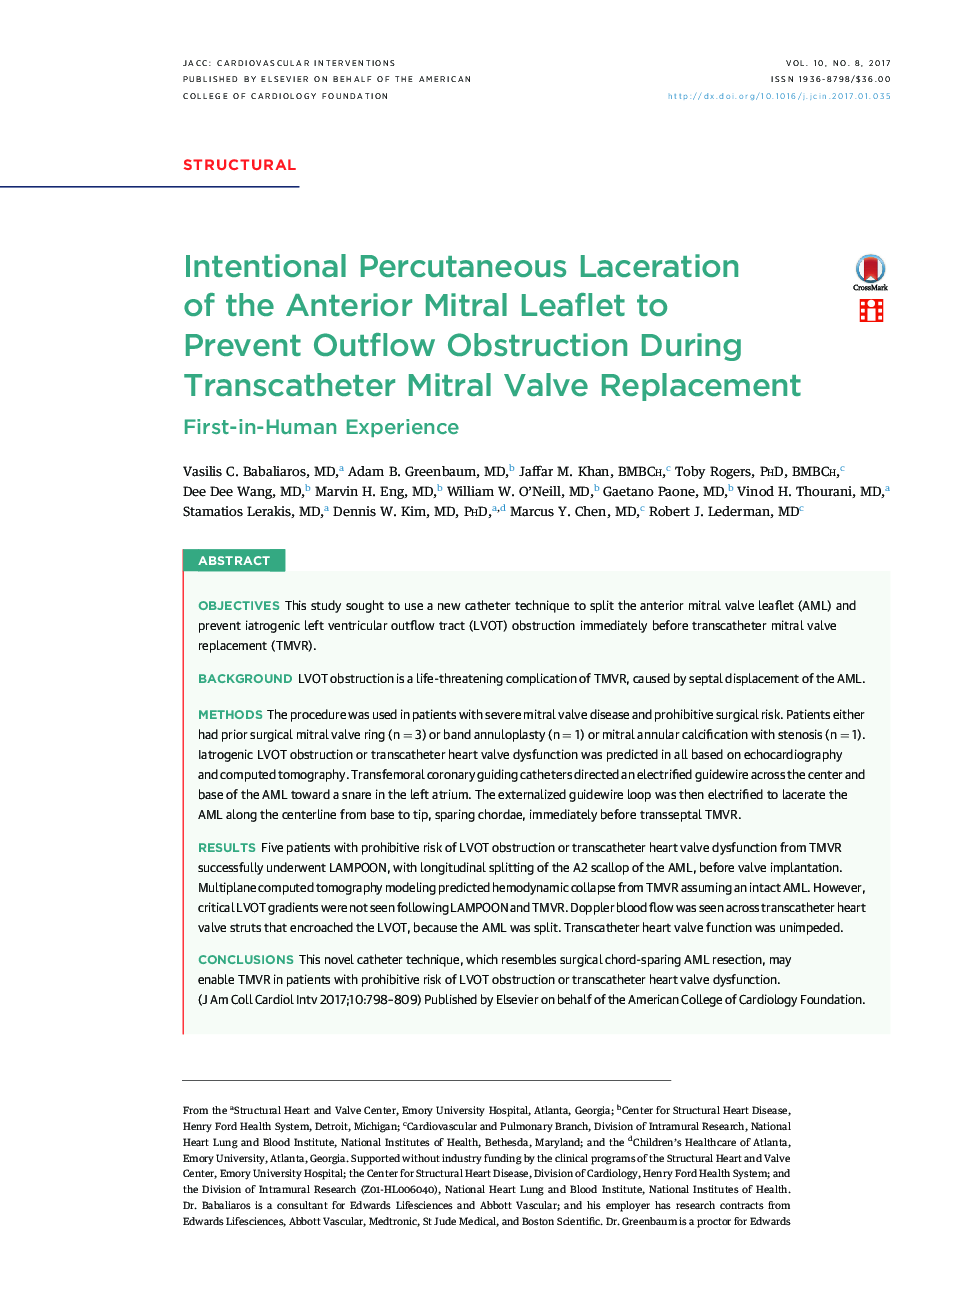 Intentional Percutaneous Laceration ofÂ theÂ Anterior Mitral Leaflet to PreventÂ OutflowÂ Obstruction During Transcatheter Mitral Valve Replacement